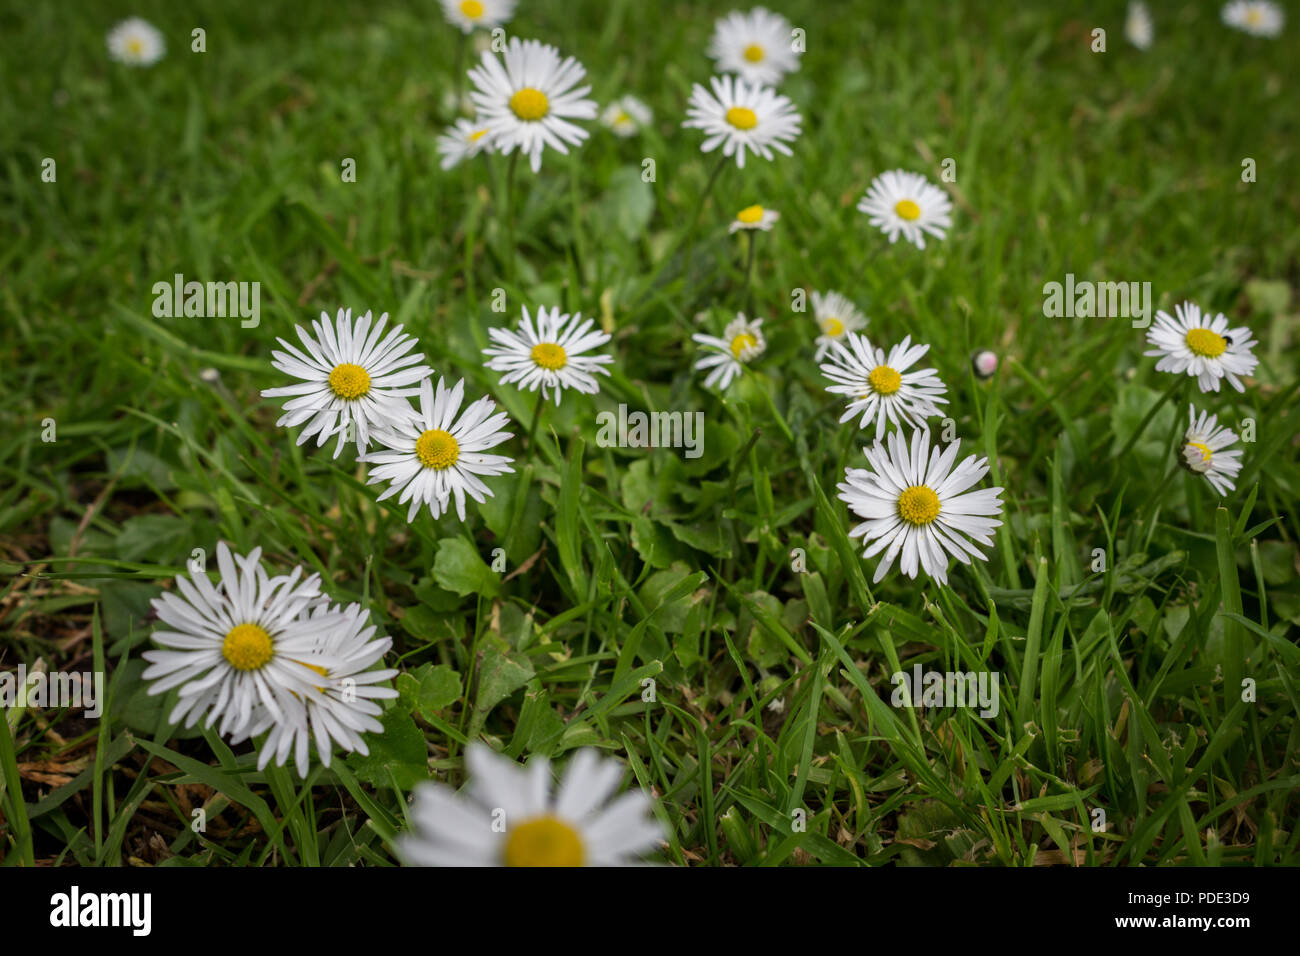 Daisy's growing and in bloom through a carpet of grass. Stock Photo